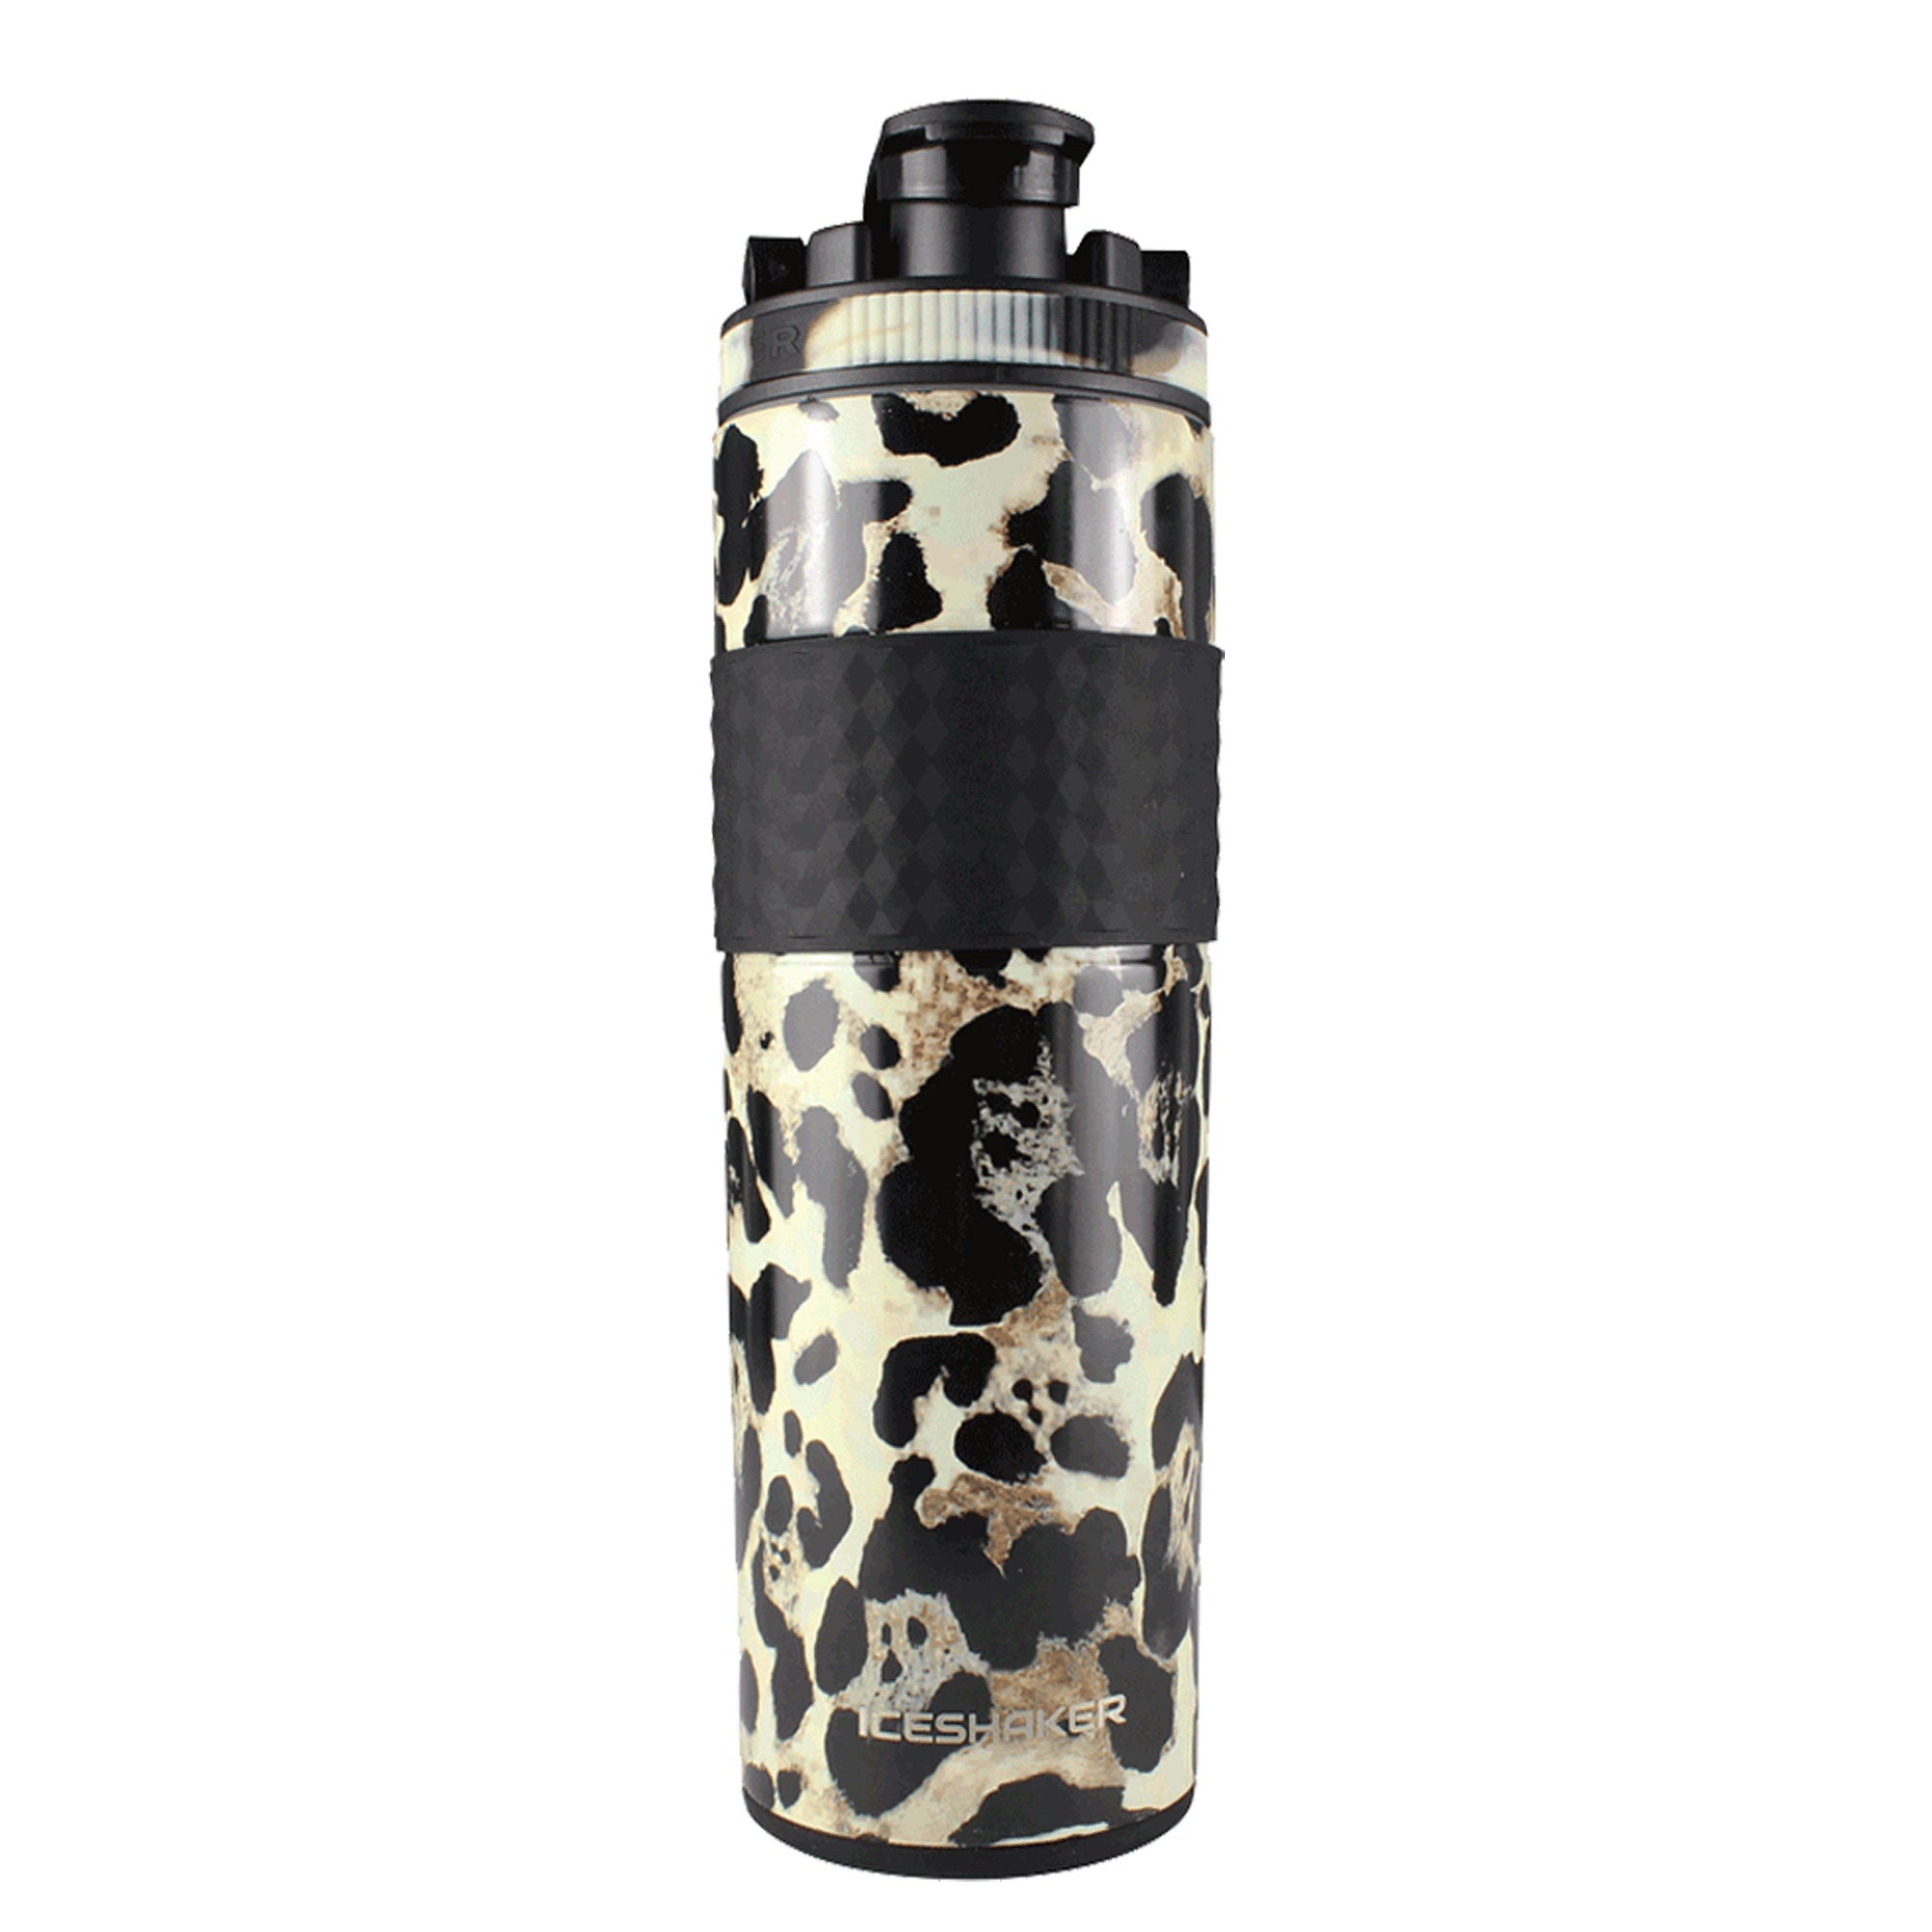 Leopard Tumbler with Lid and Straw Stainless Steel 20oz Leopard Print Skinny Tumbler Insulated Cheetah Print Cups Water Bottle Coffee Tumbler Travel